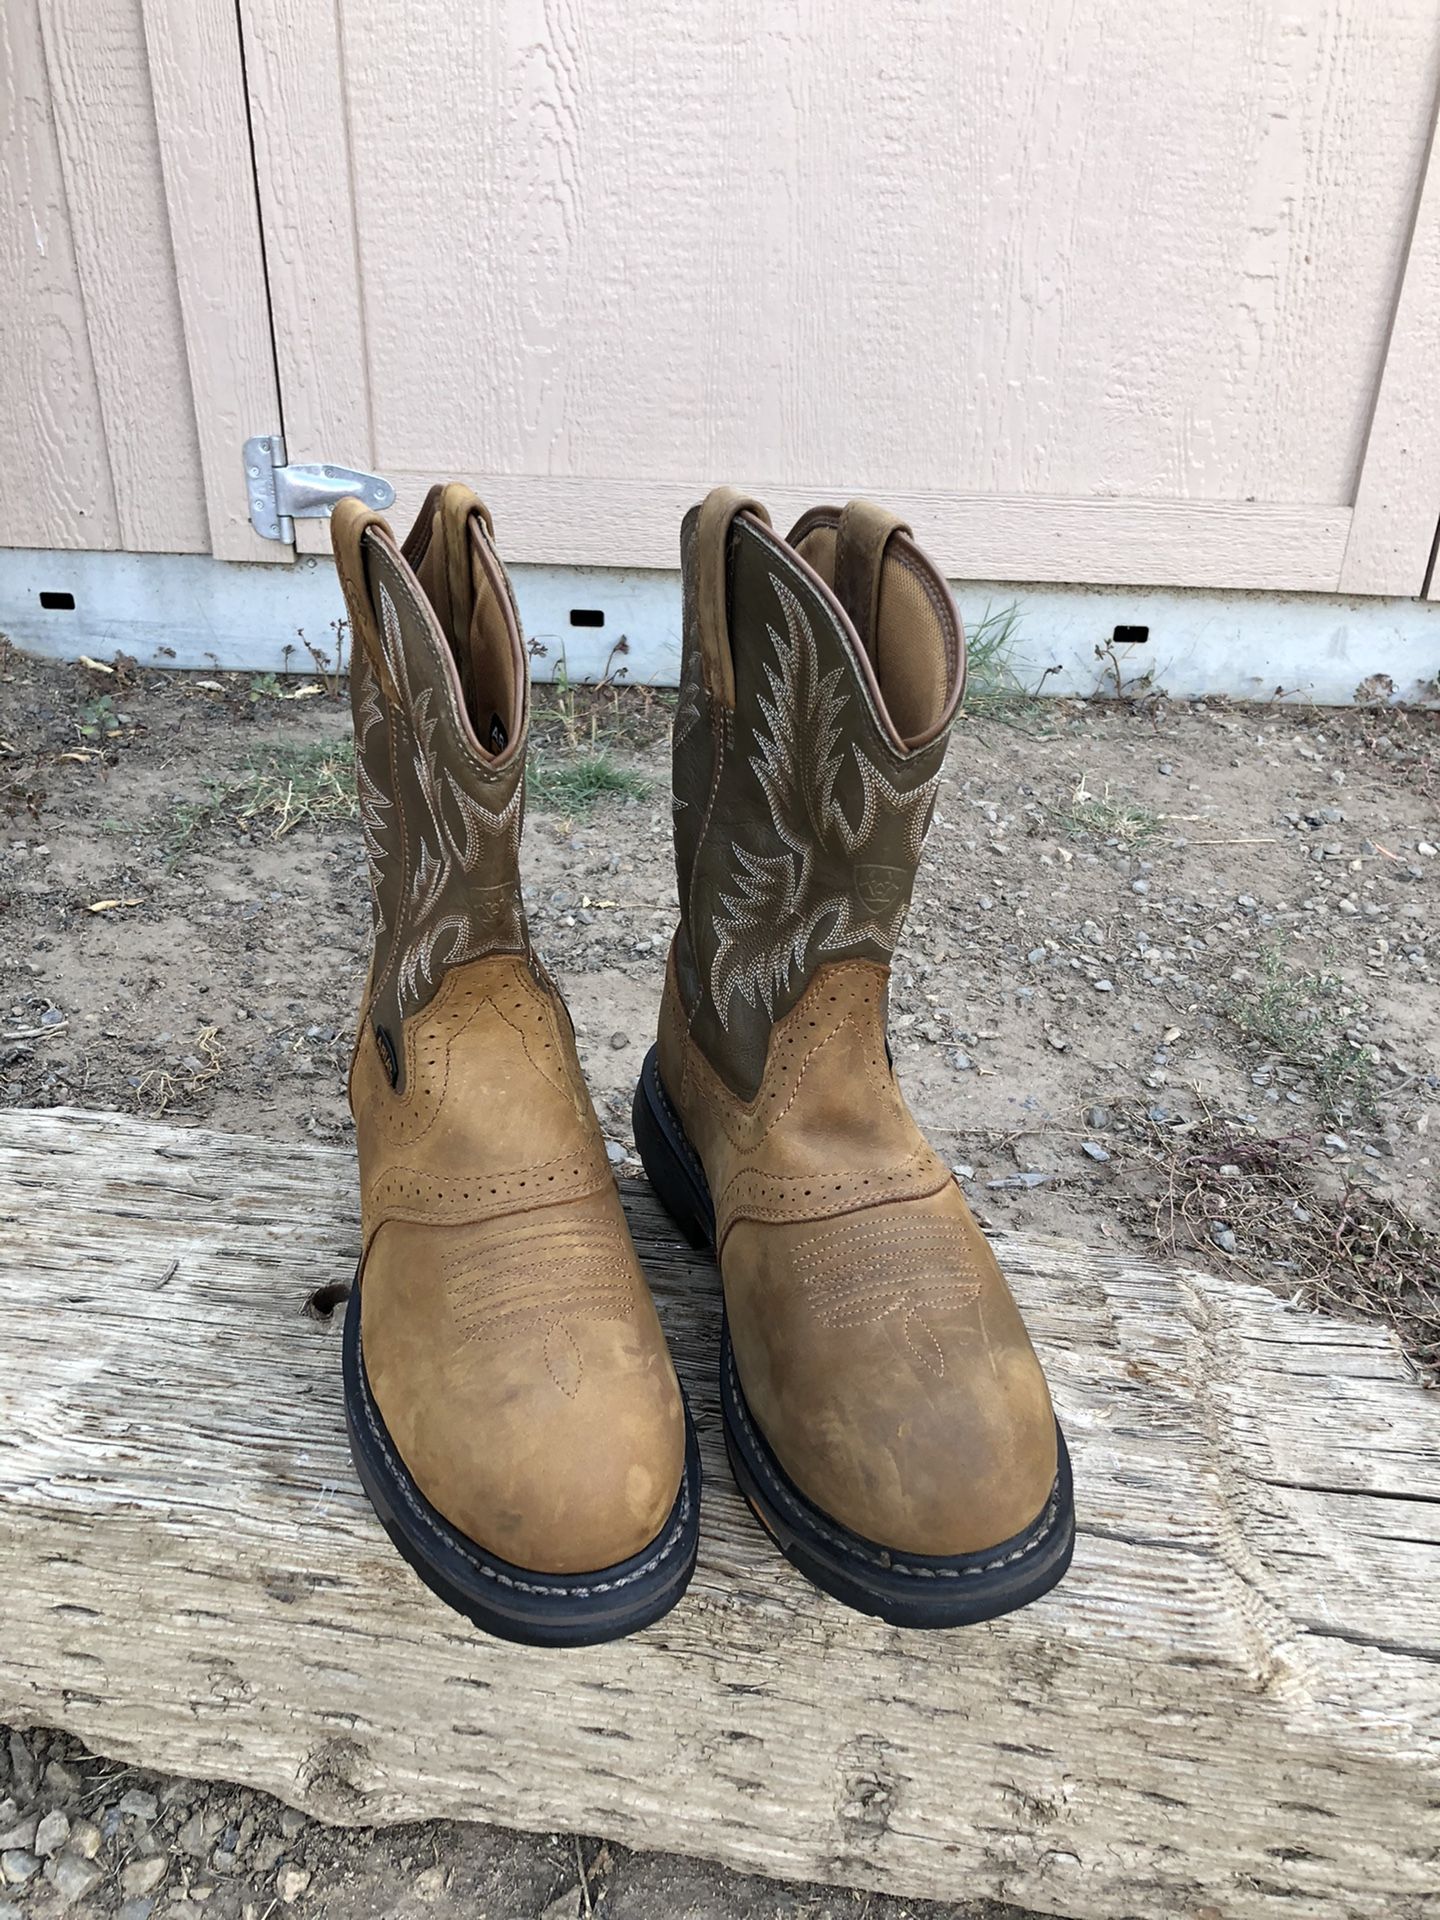 Ariat Composite Toe Work Boots Size 9.5 D